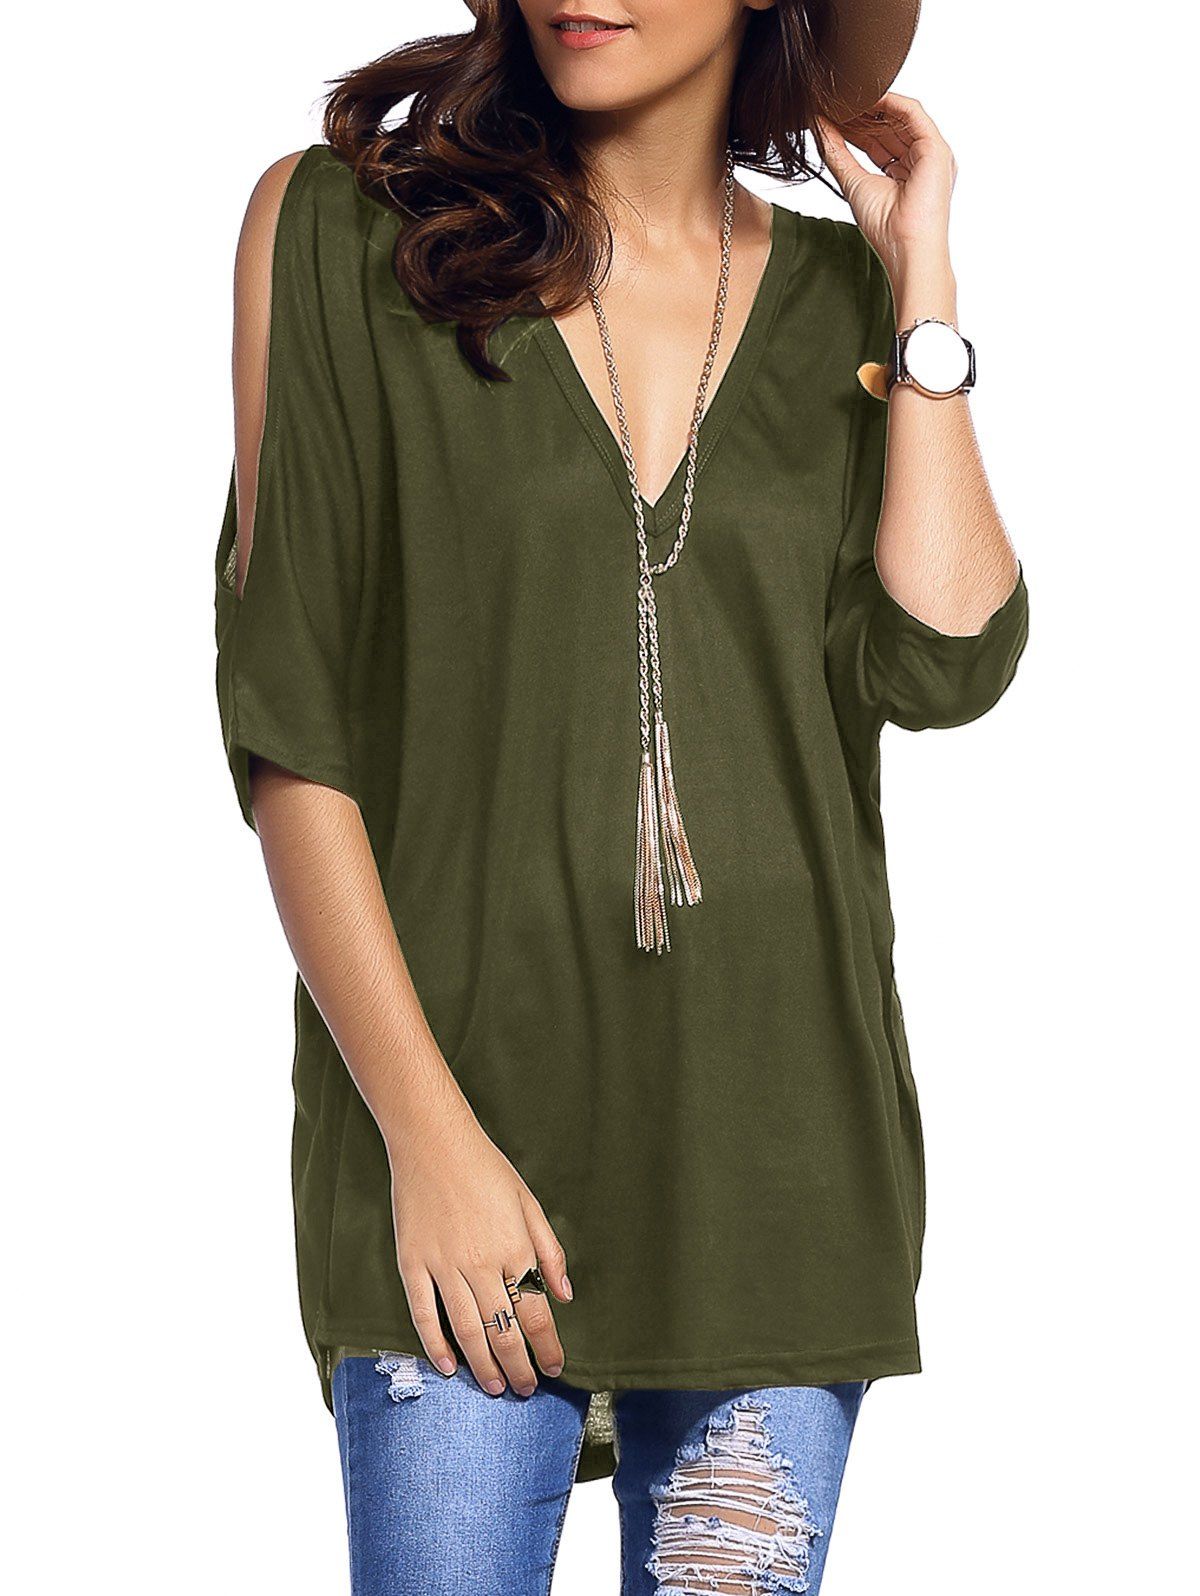 [41% OFF] 2021 Plunging Neck Cold Shoulder Asymmetrical T-Shirt In ARMY ...